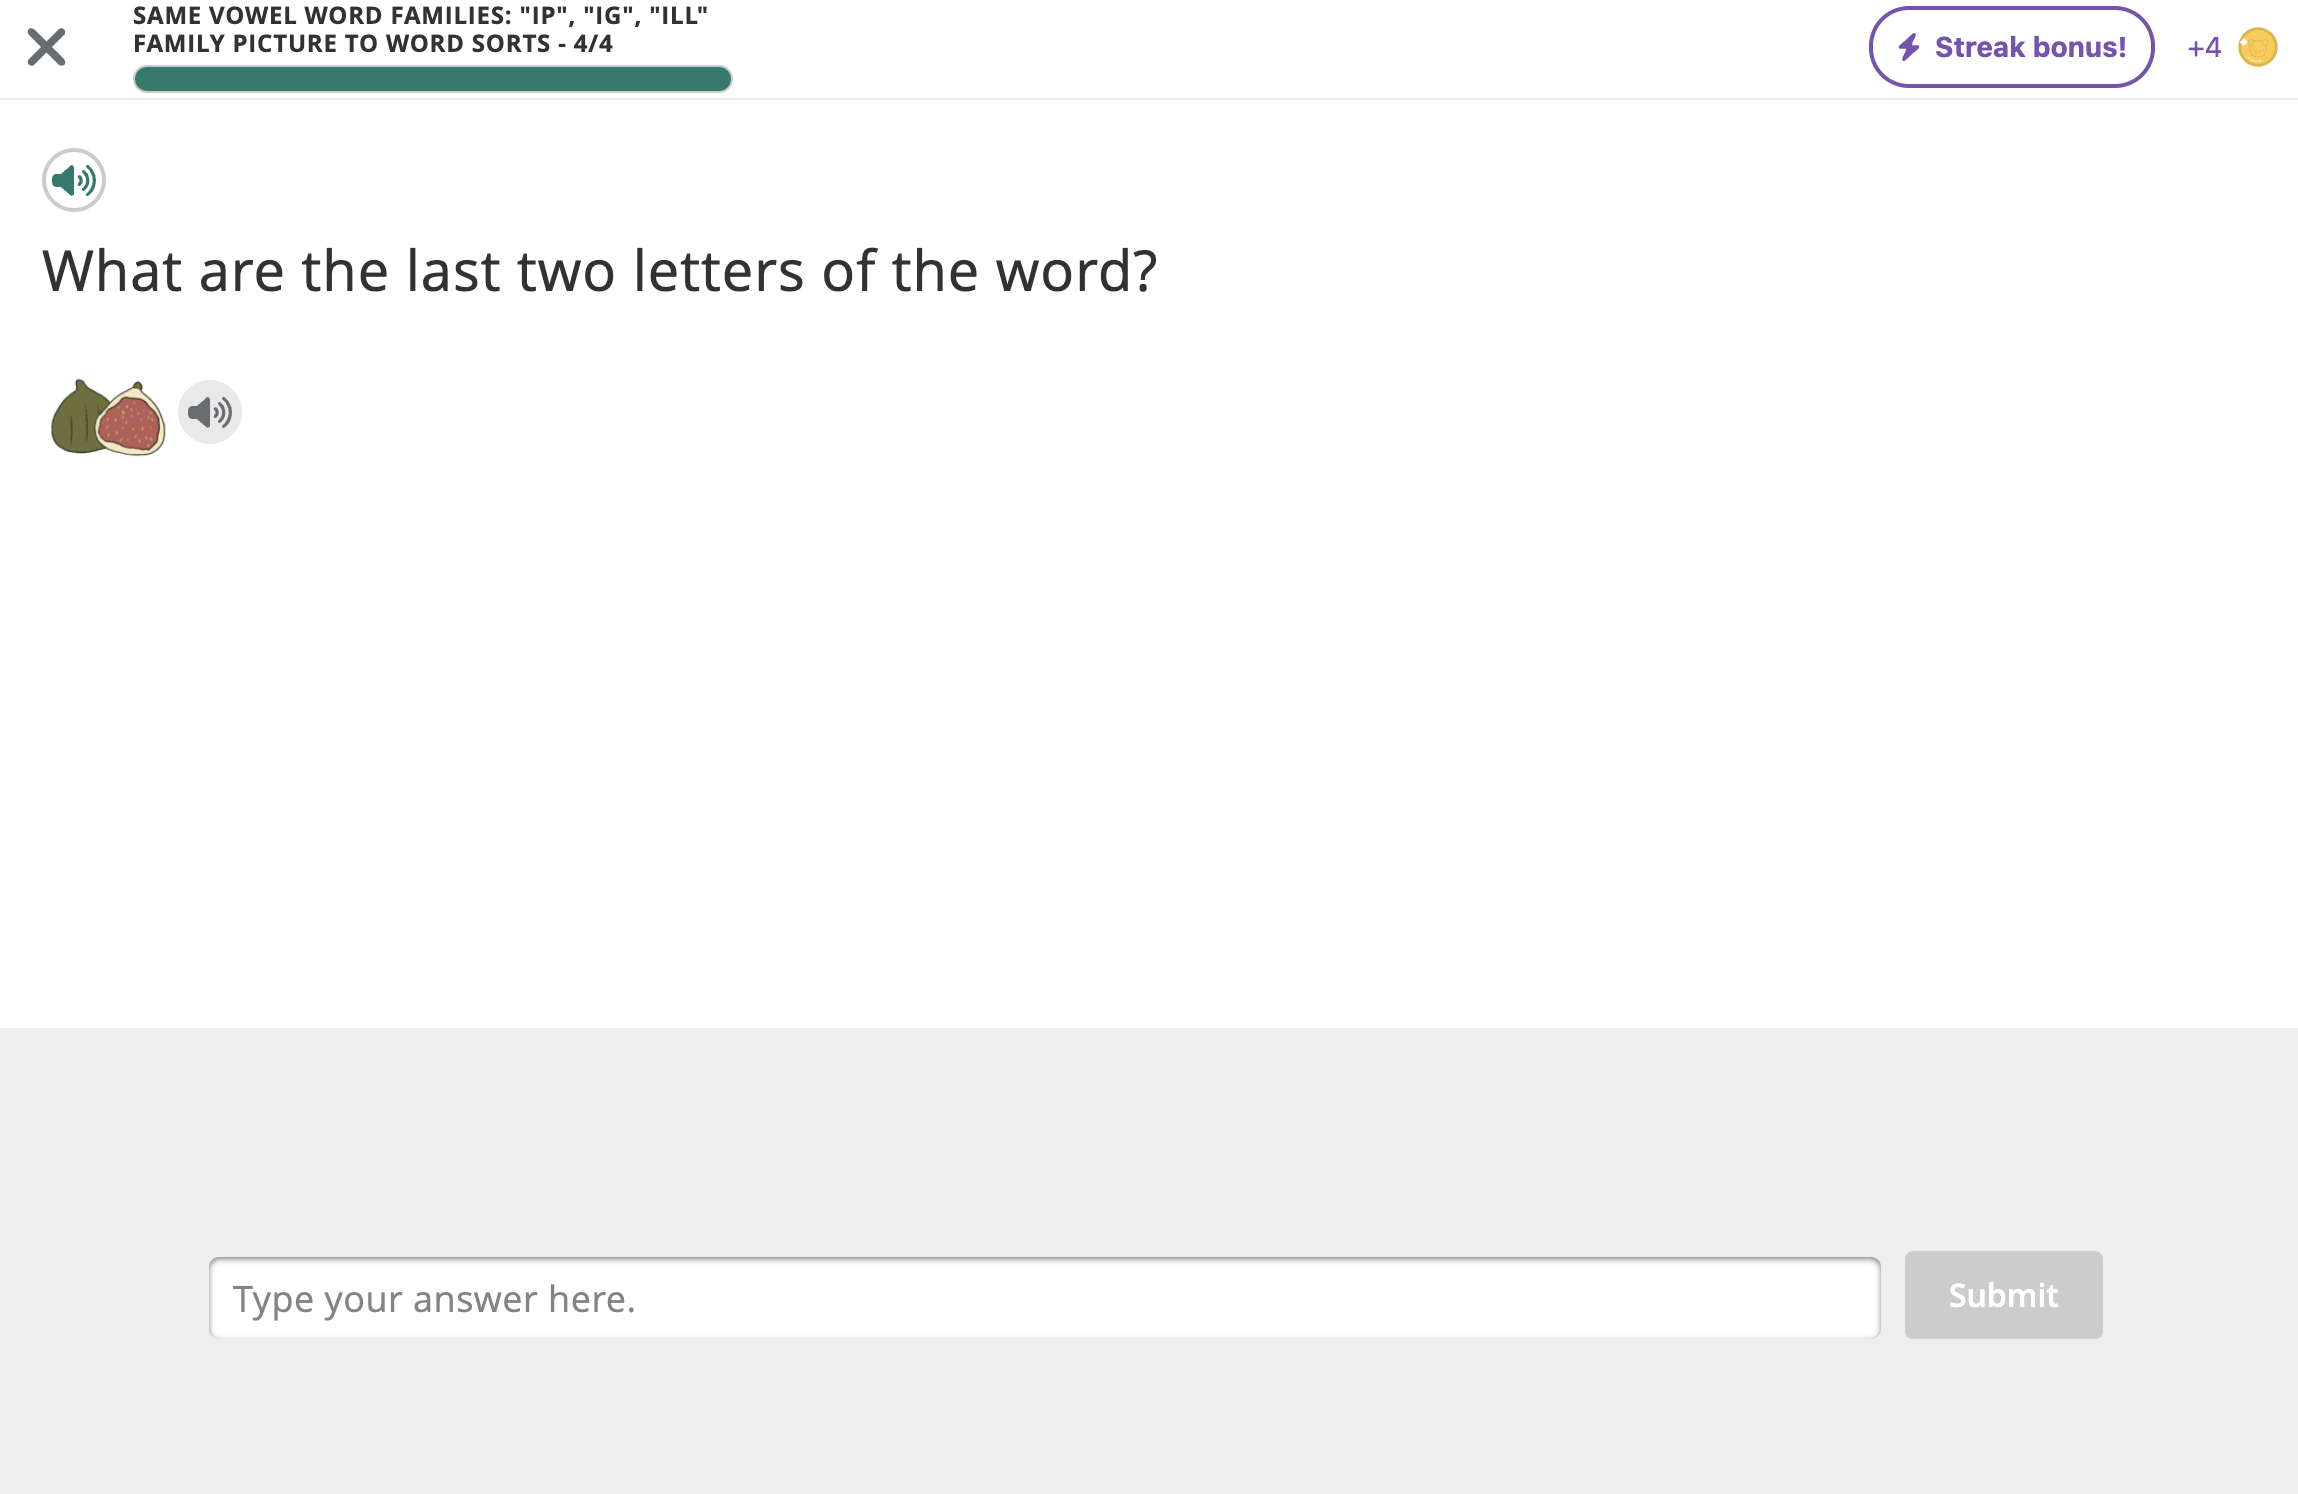 An example text input activity, where the student listens to a word and then enters the last two letters of that word.